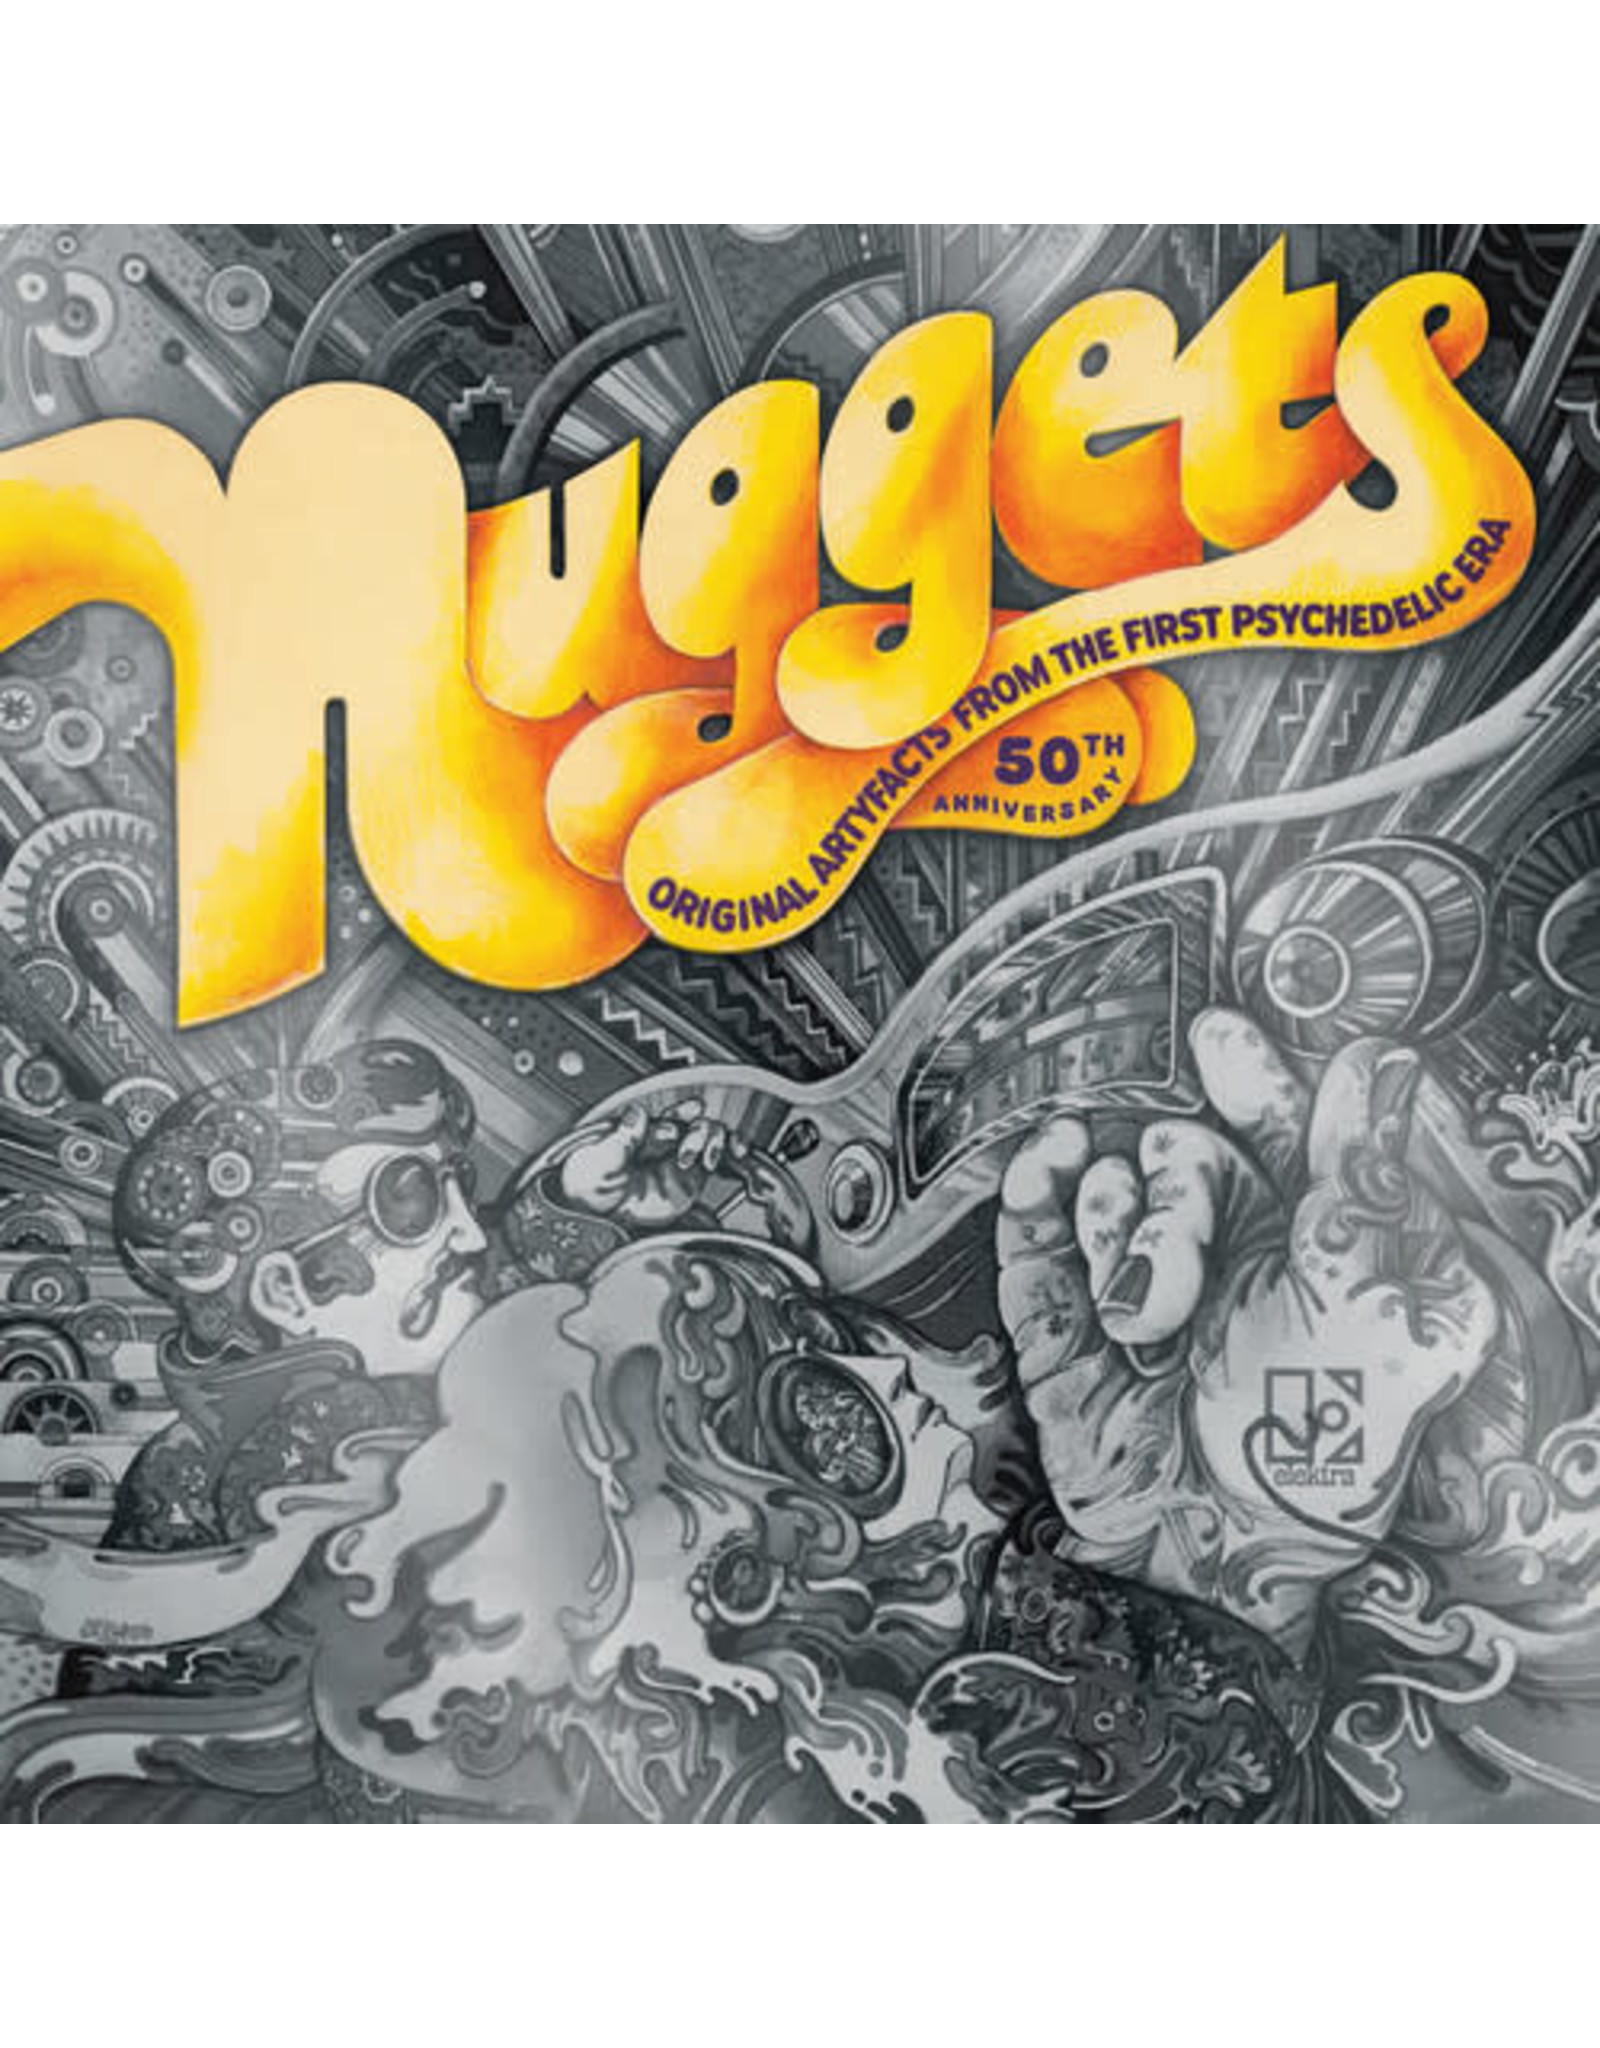 Nuggets - Nuggets: Original Artyfacts From The First Psychedelic Era